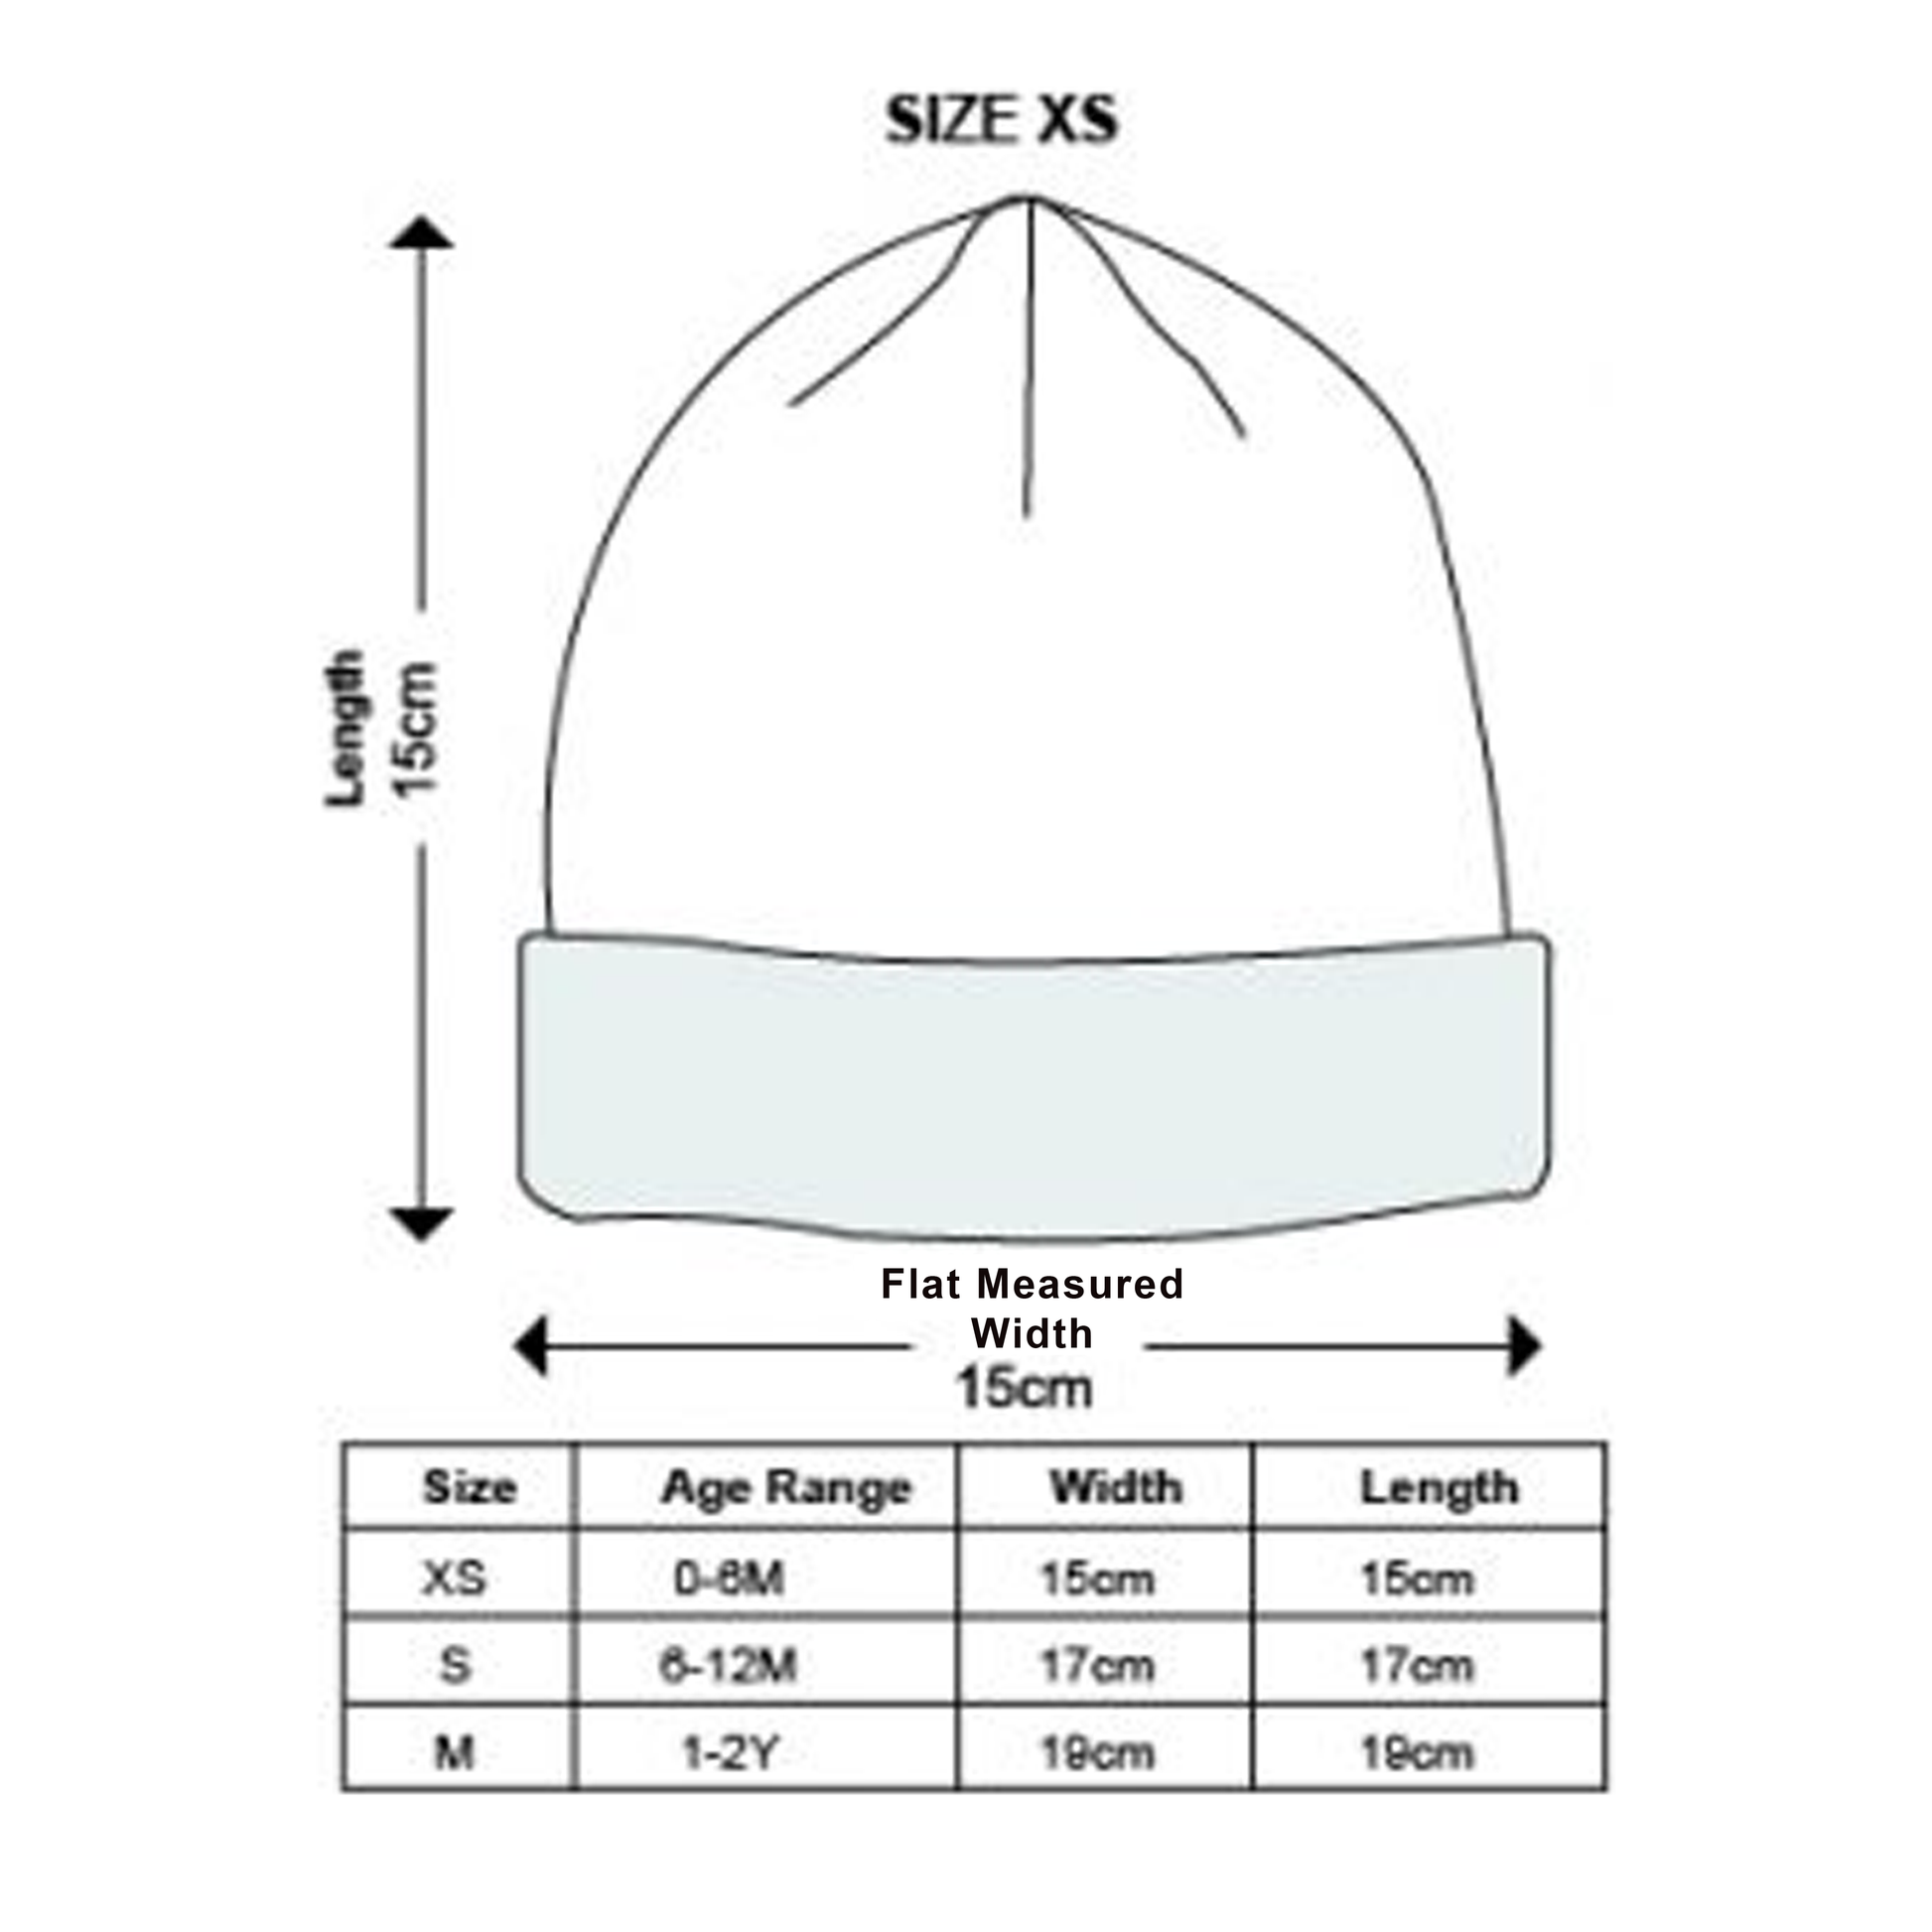 Size guide for Thick, chunky woollen baby winter hat, by Pebble Child, made from 100% New Zealand merino wool